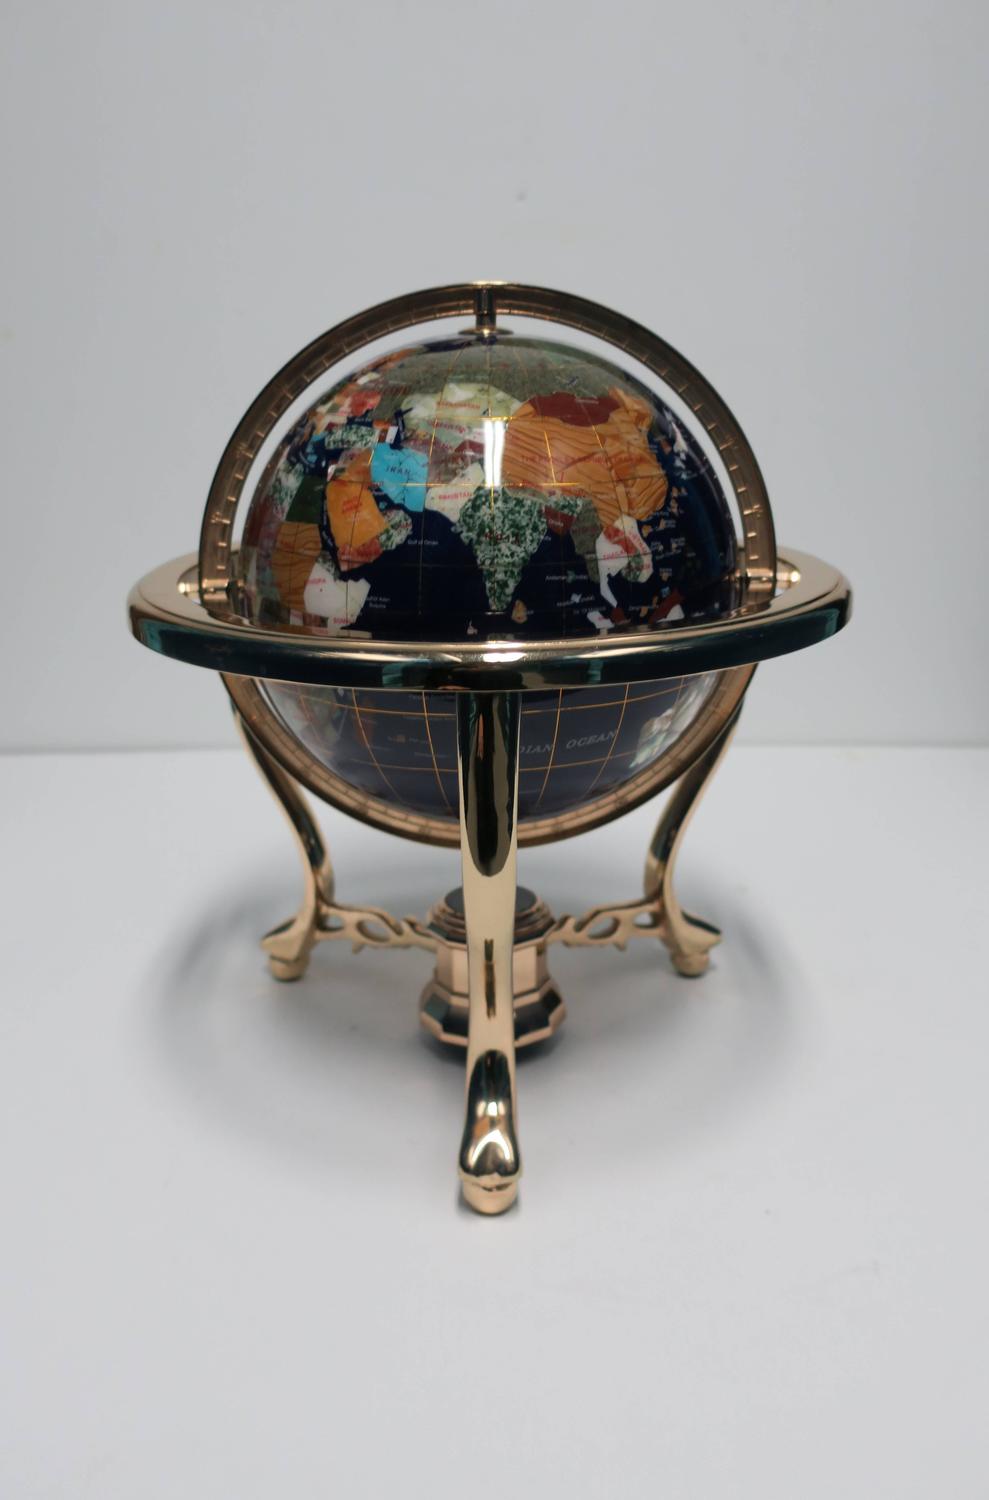 Beautiful World Globe Of Marble and Onyx For Sale at 1stdibs